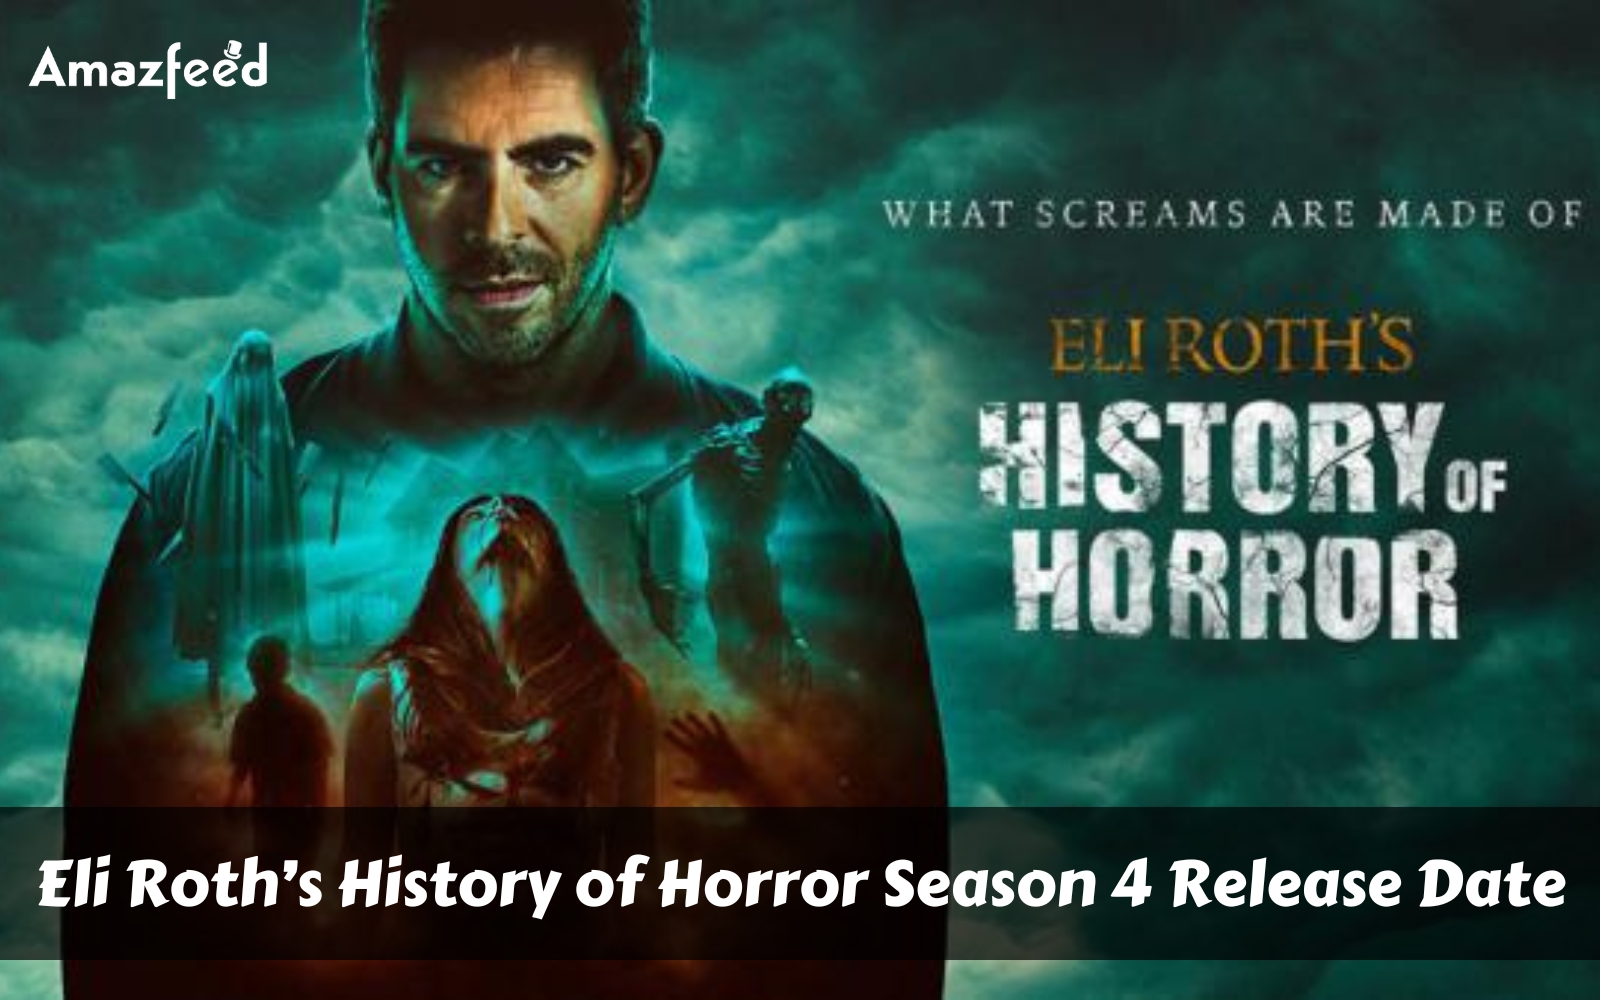 What is Eli Roths History of Horror Season 4 Release Date?